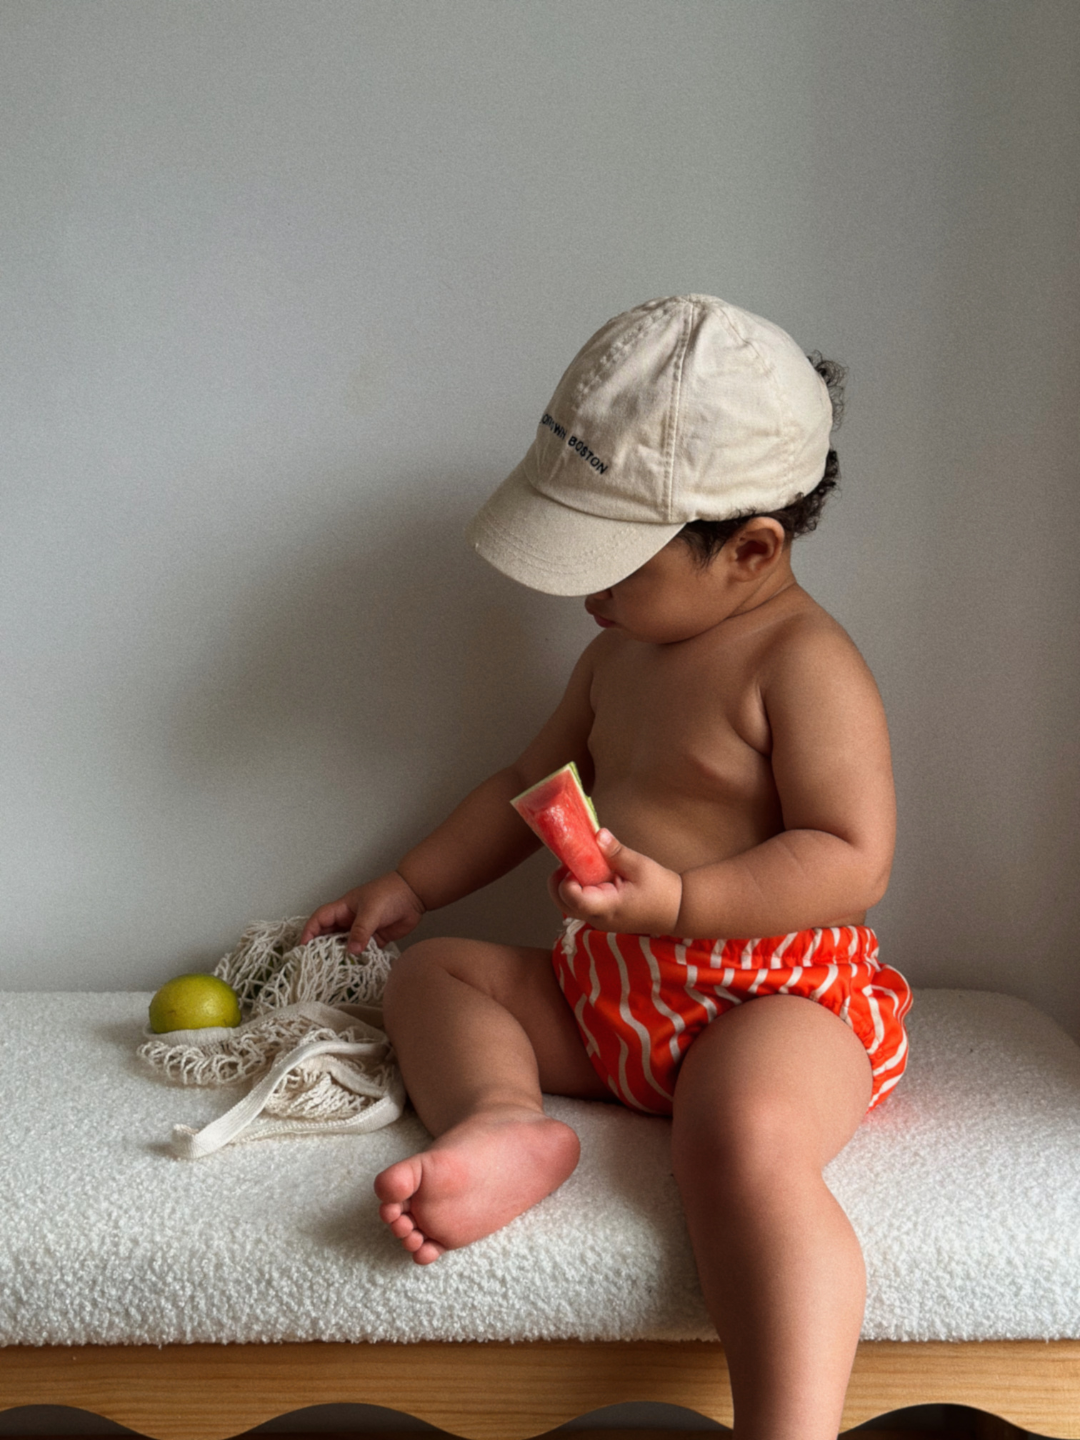 The front view of the swim diaper with an elastic waist with a tie and elastic leg holes on a child sitting down. The diaper is a bright orange with wavy and vertical cream colored lines.